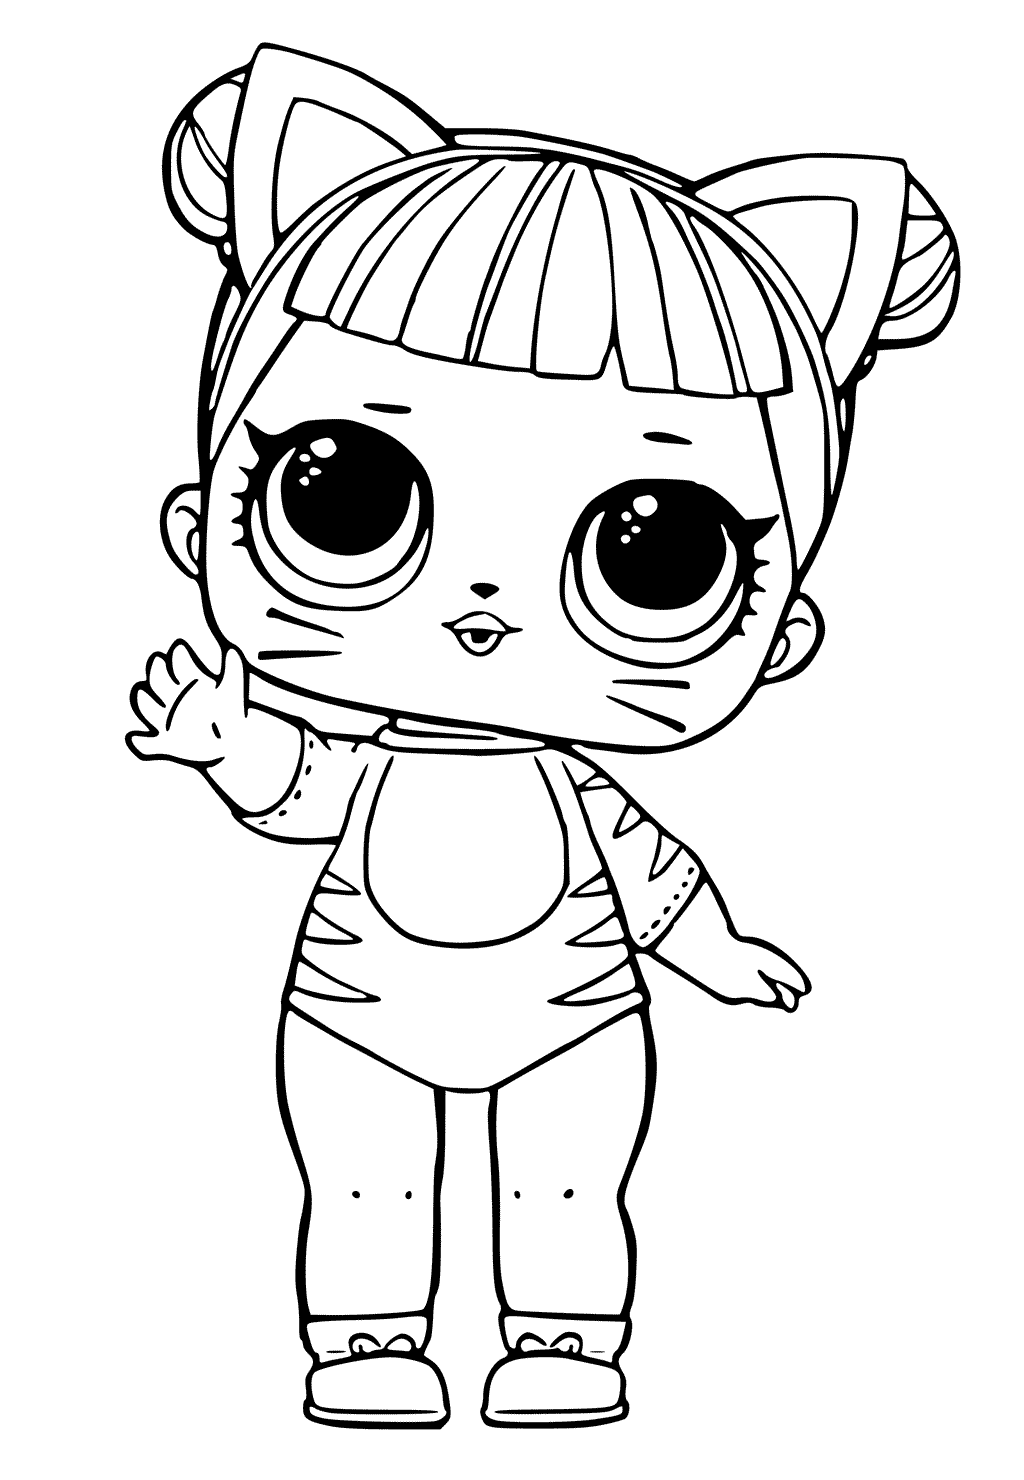 dolls coloring pages dolls coloring pages pages coloring dolls 